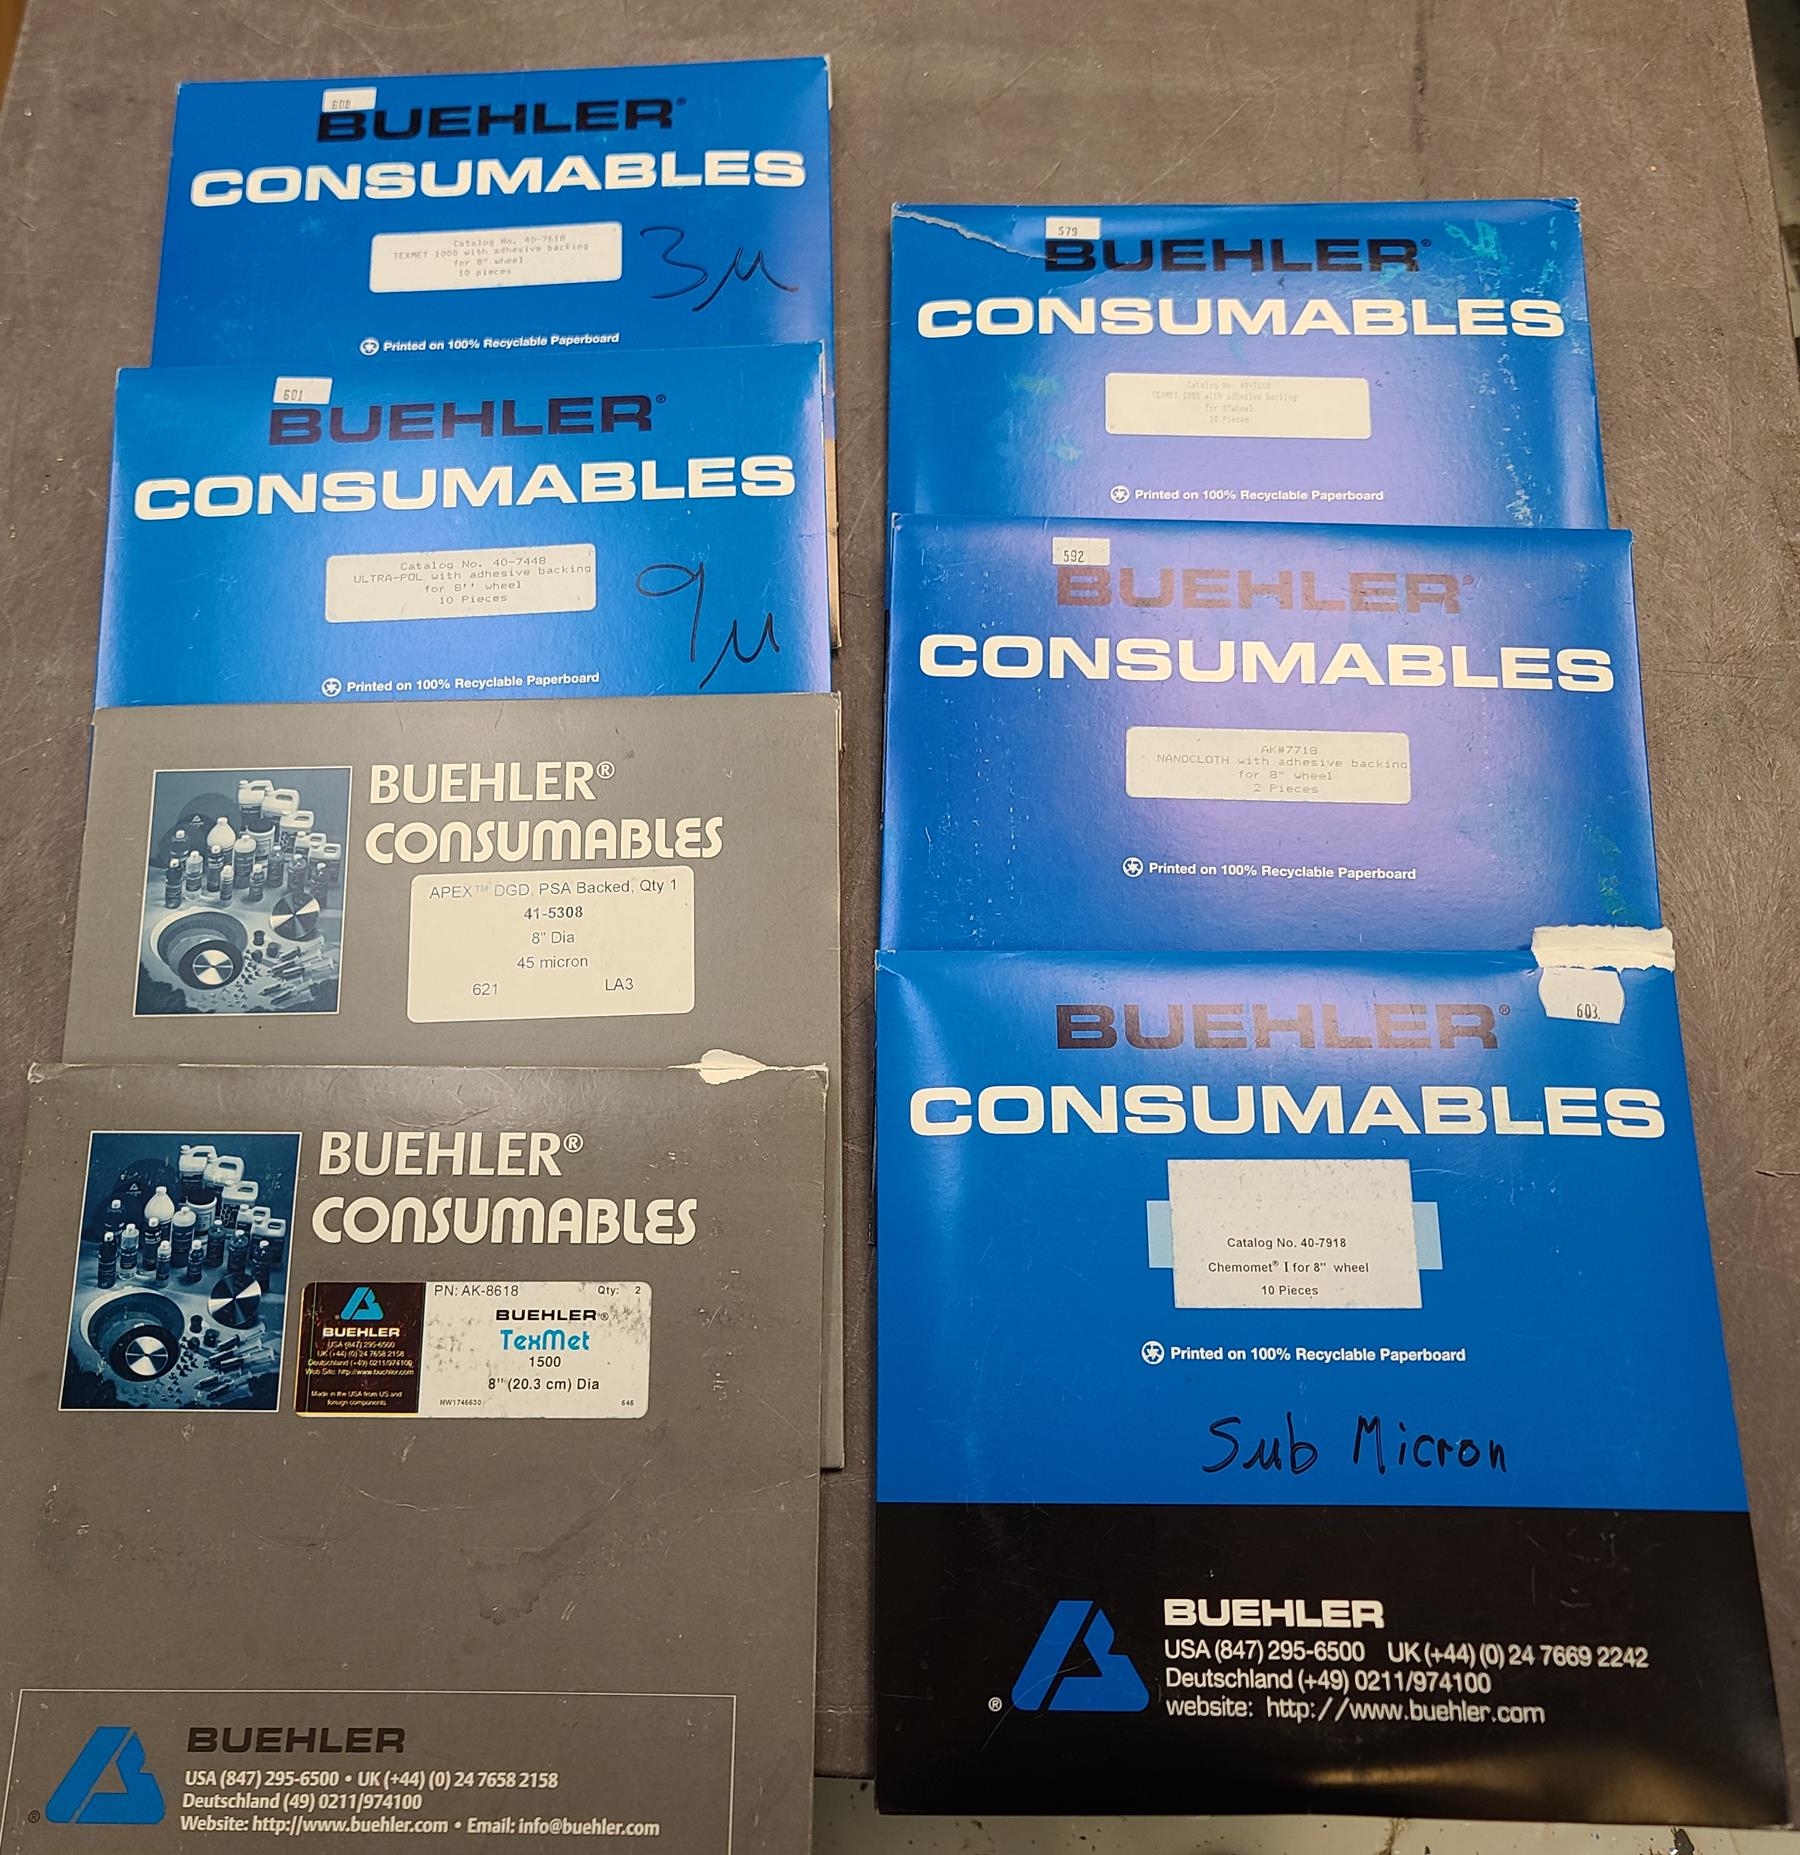 3M Buehler Consumables just arrived